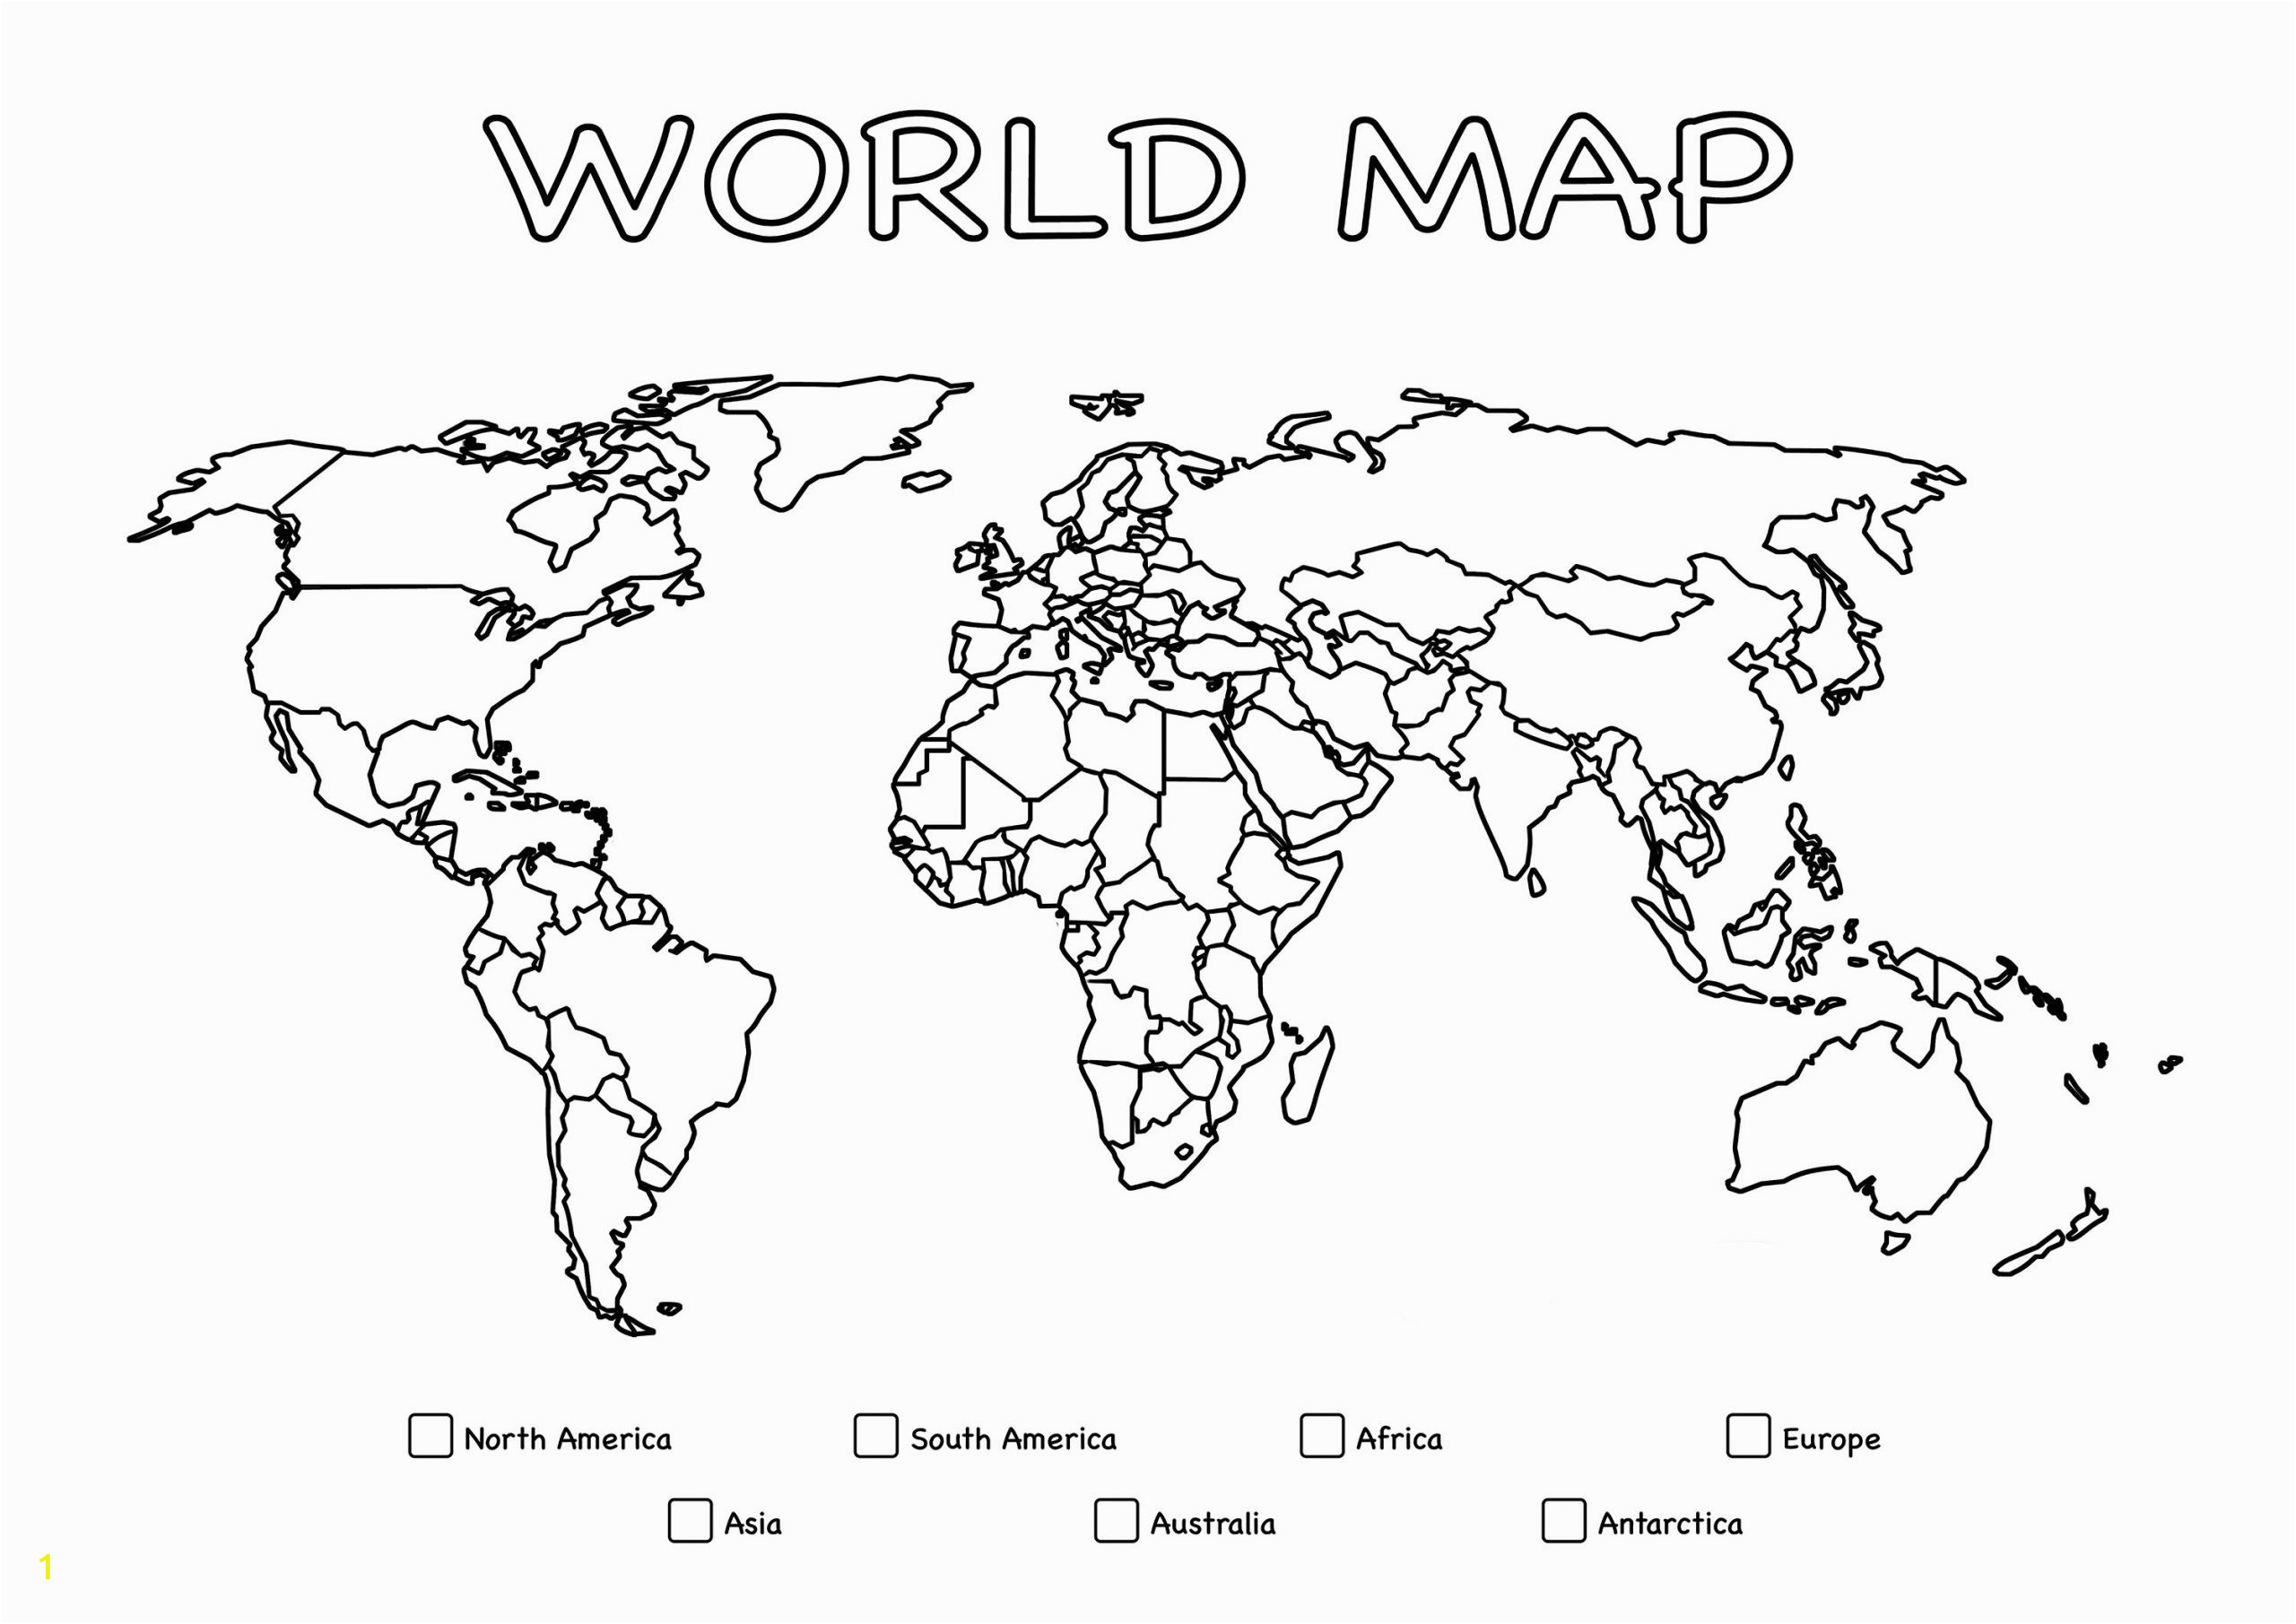 World Map Coloring Pages to Print Printable Giant Coloring Poster – World Map Continents